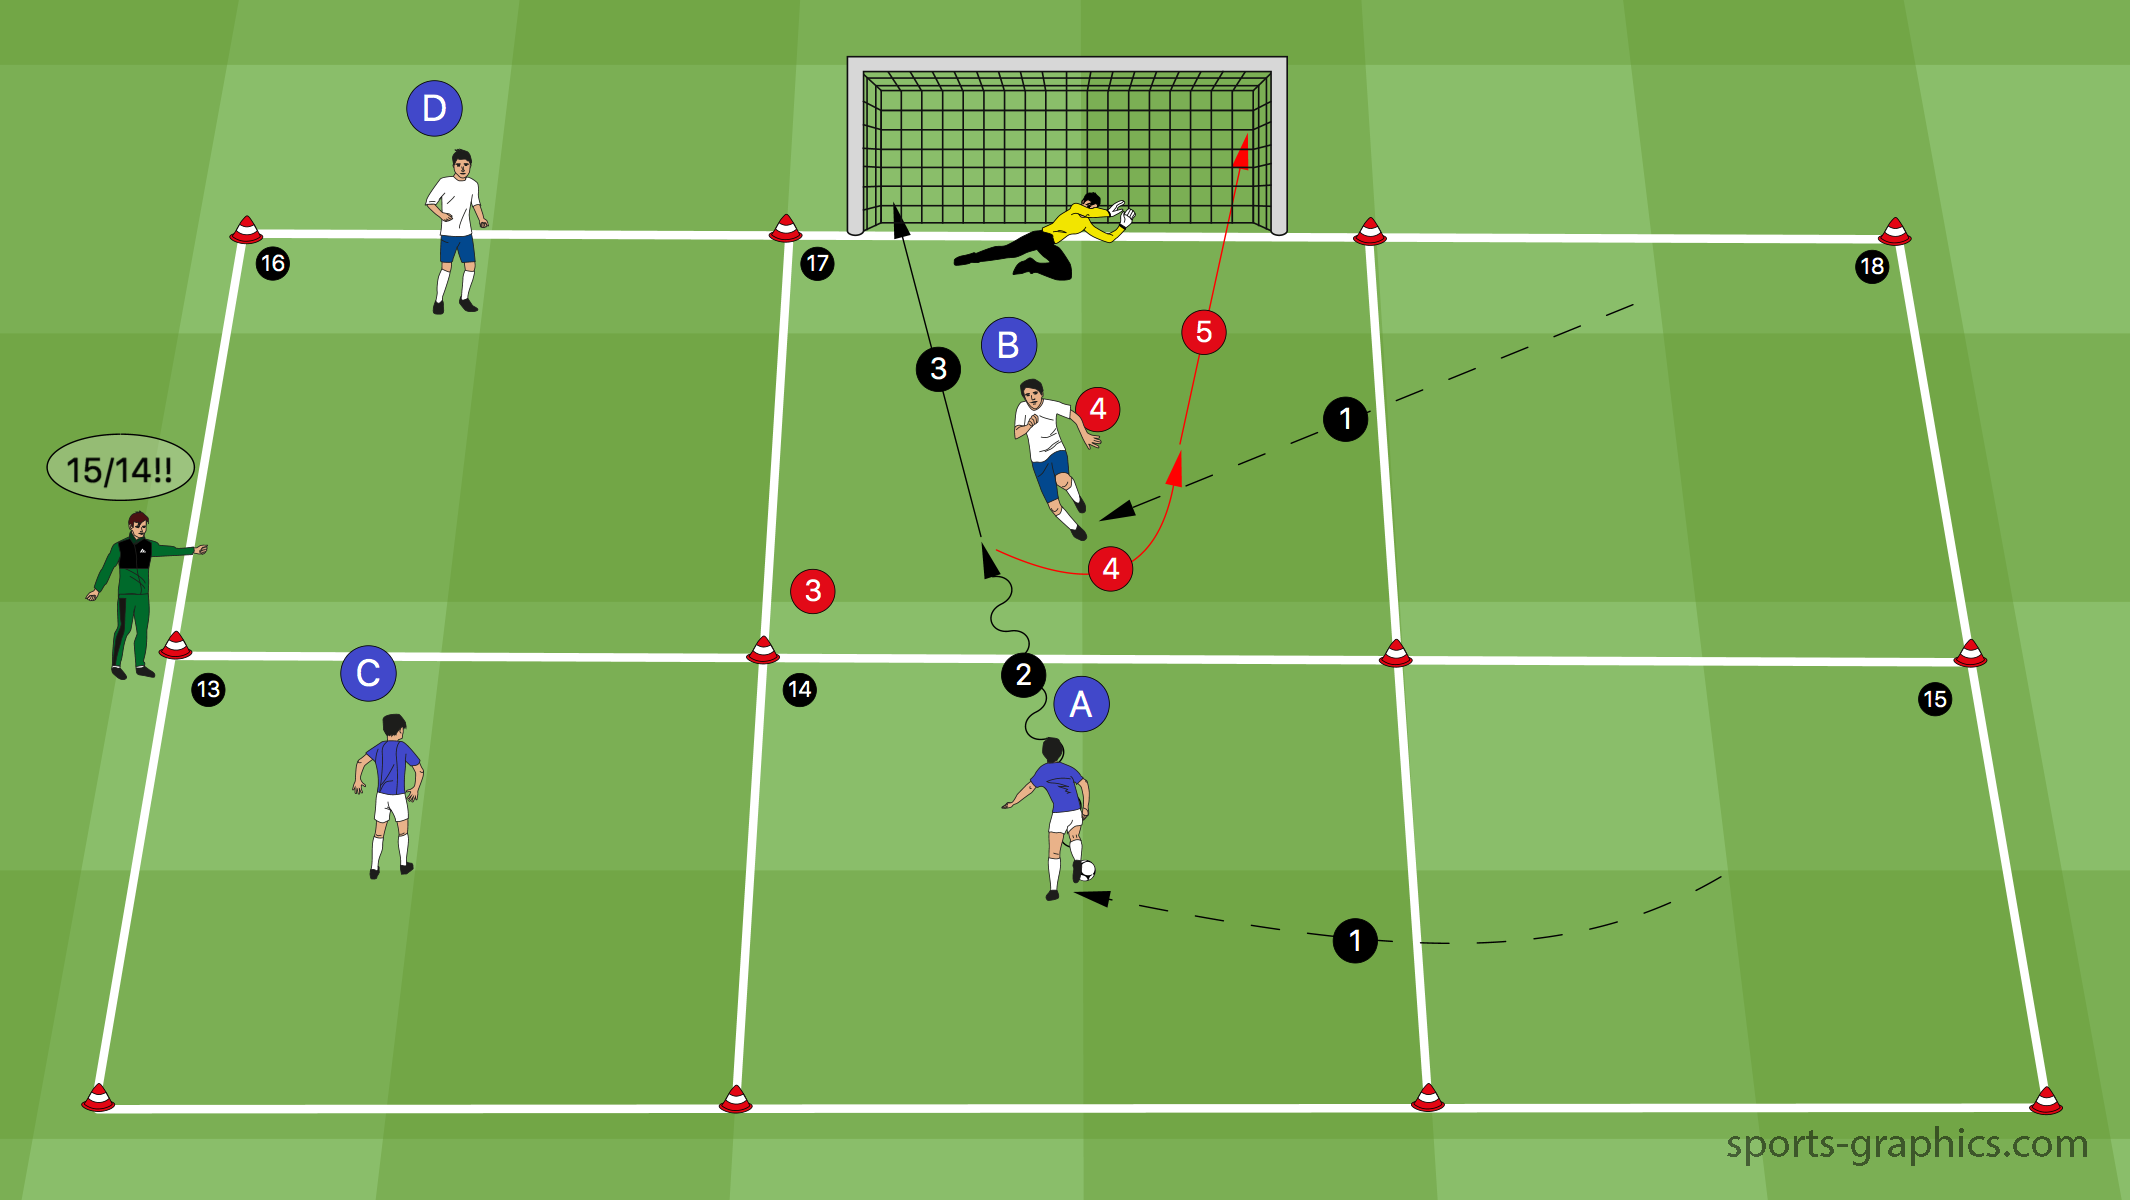 Seven steps to perfect ball control - Soccer Drills - Soccer Coach